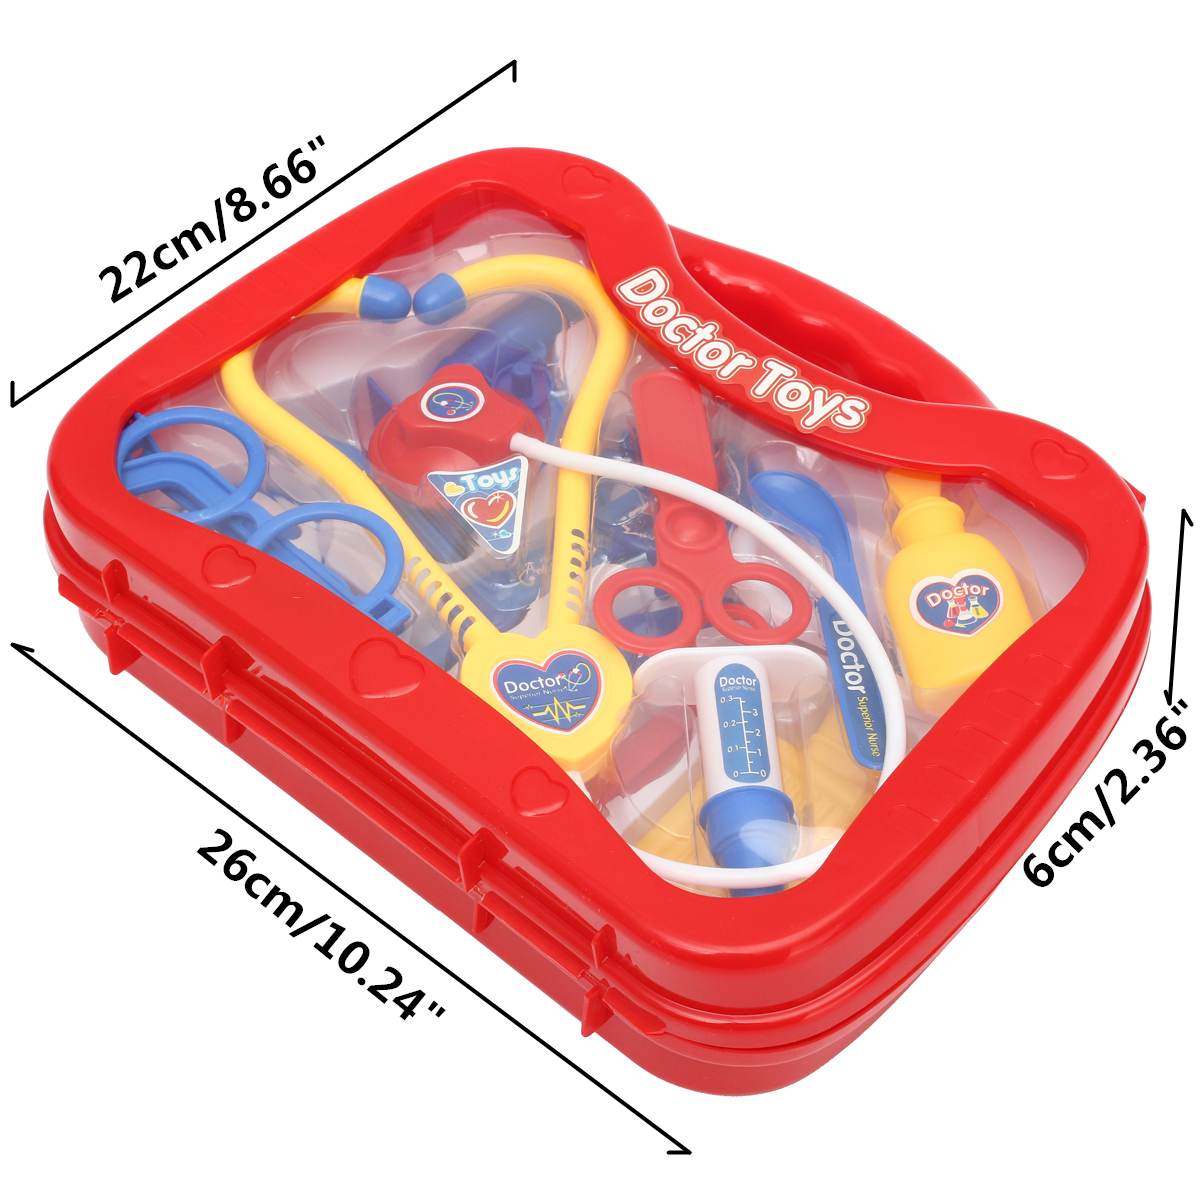 Kids Childrens Role Play Doctor Nurses Toy Medical Set Kit Gift Toys 33